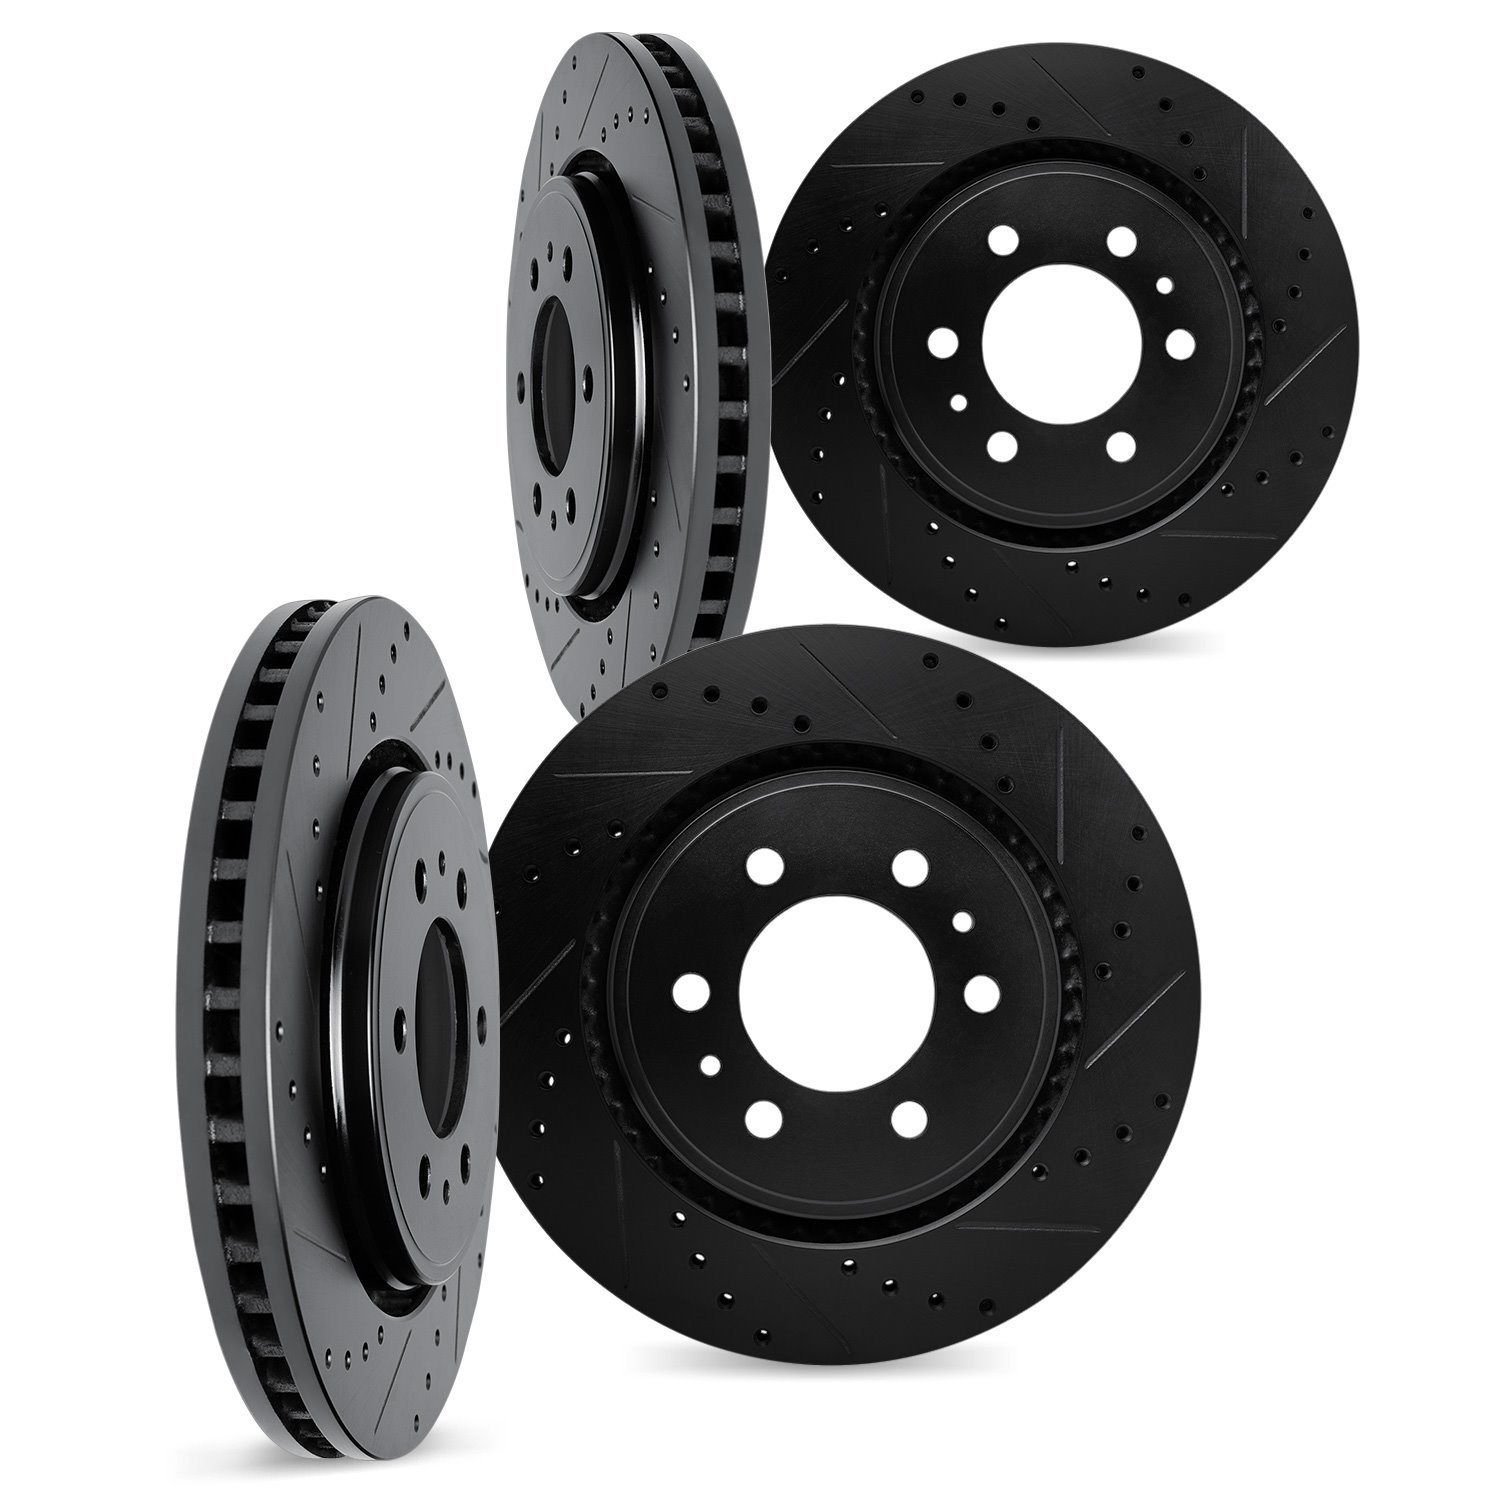 Drilled/Slotted Brake Rotors [Black], Fits Select GM